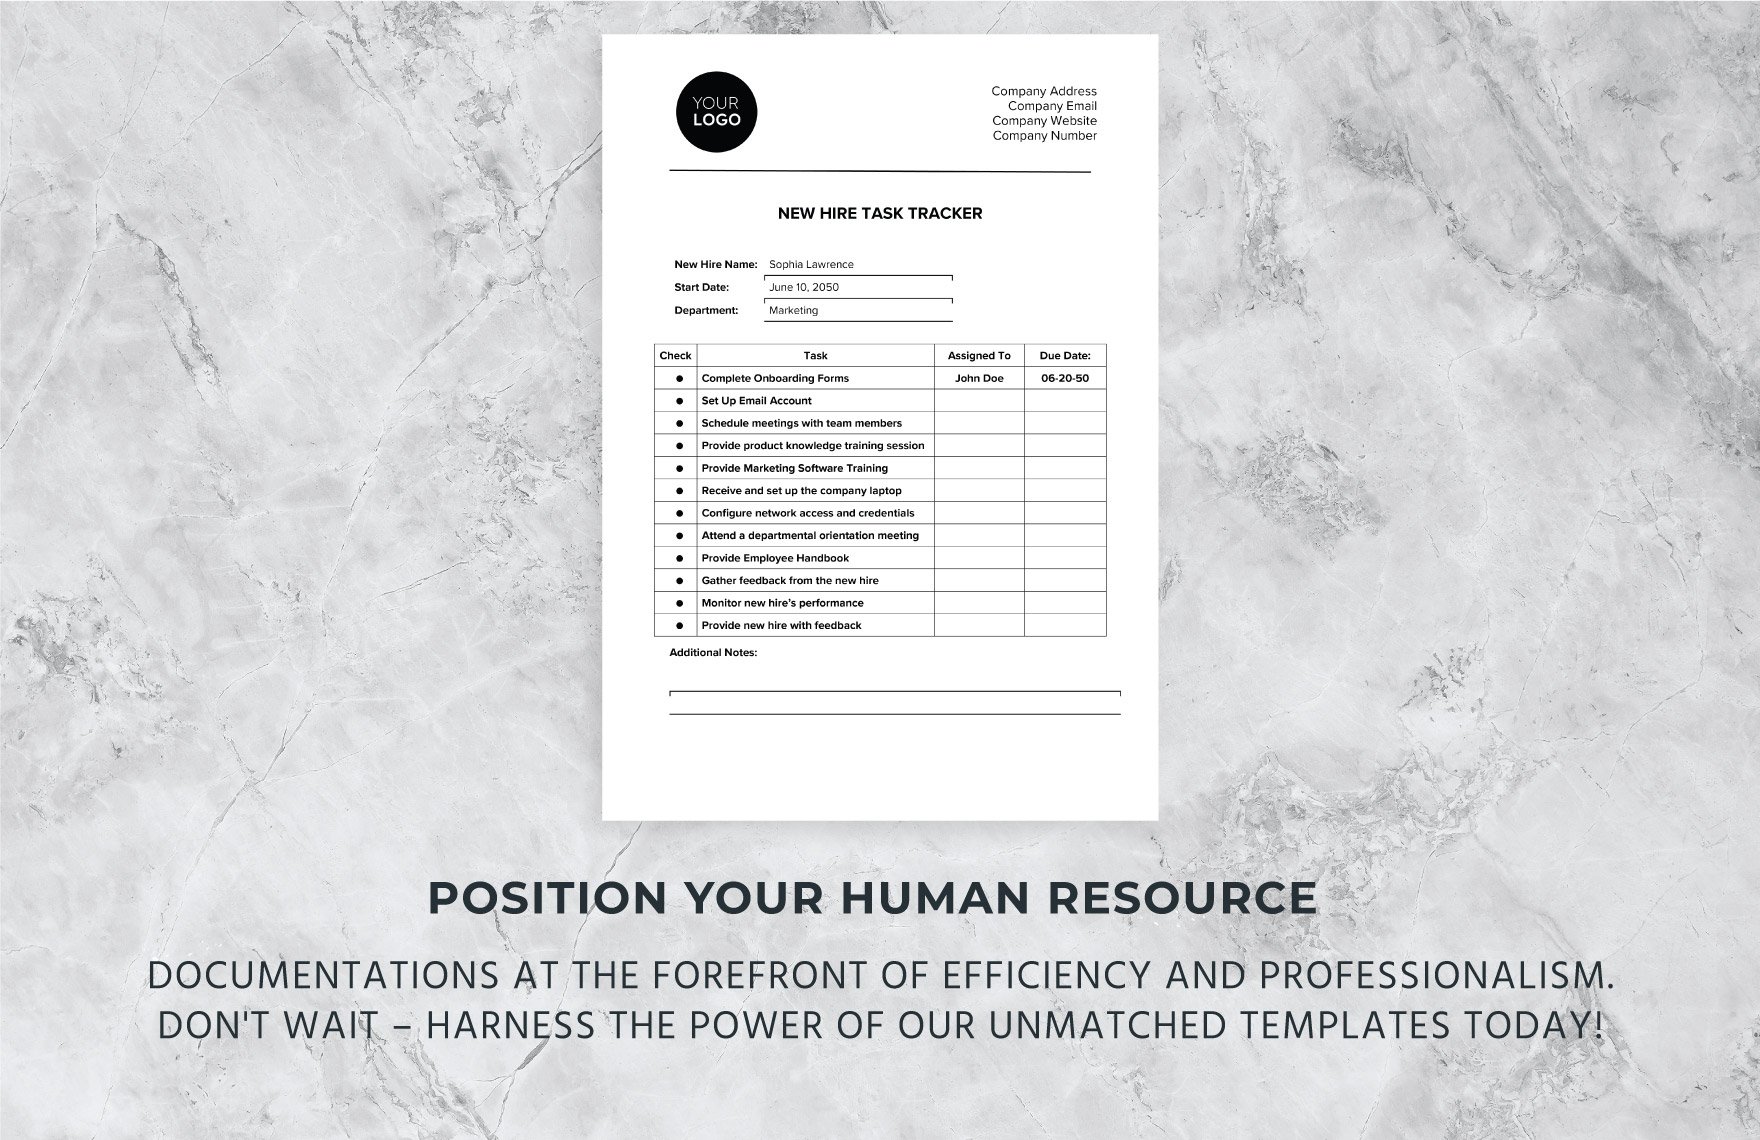 New Hire Task Tracker HR Template